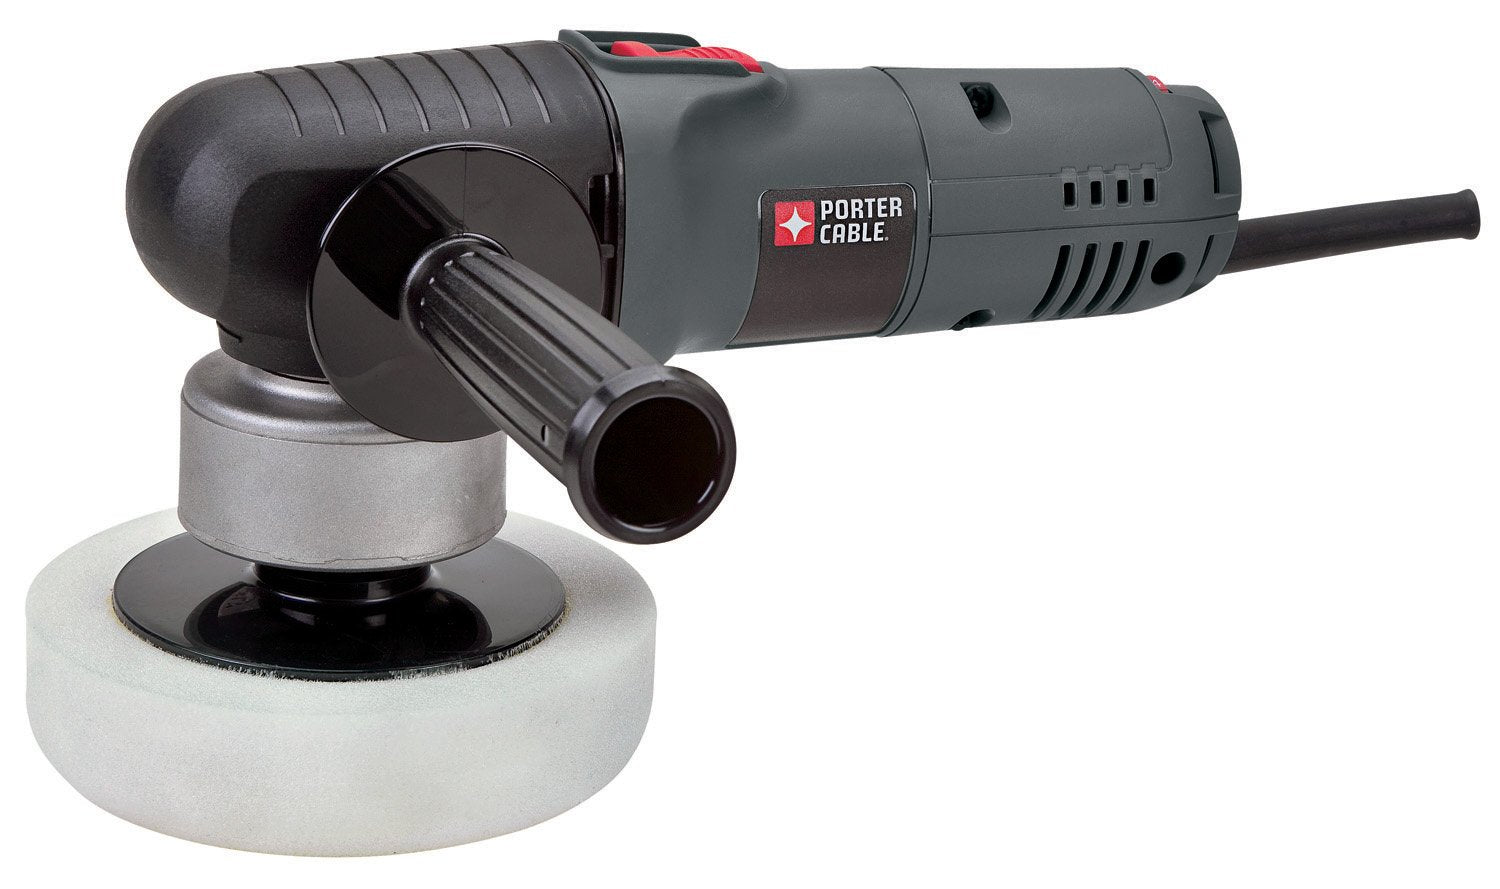 PORTER-CABLE Variable Speed Polisher. 6-Inch (7424XP) - MPR Tools & Equipment